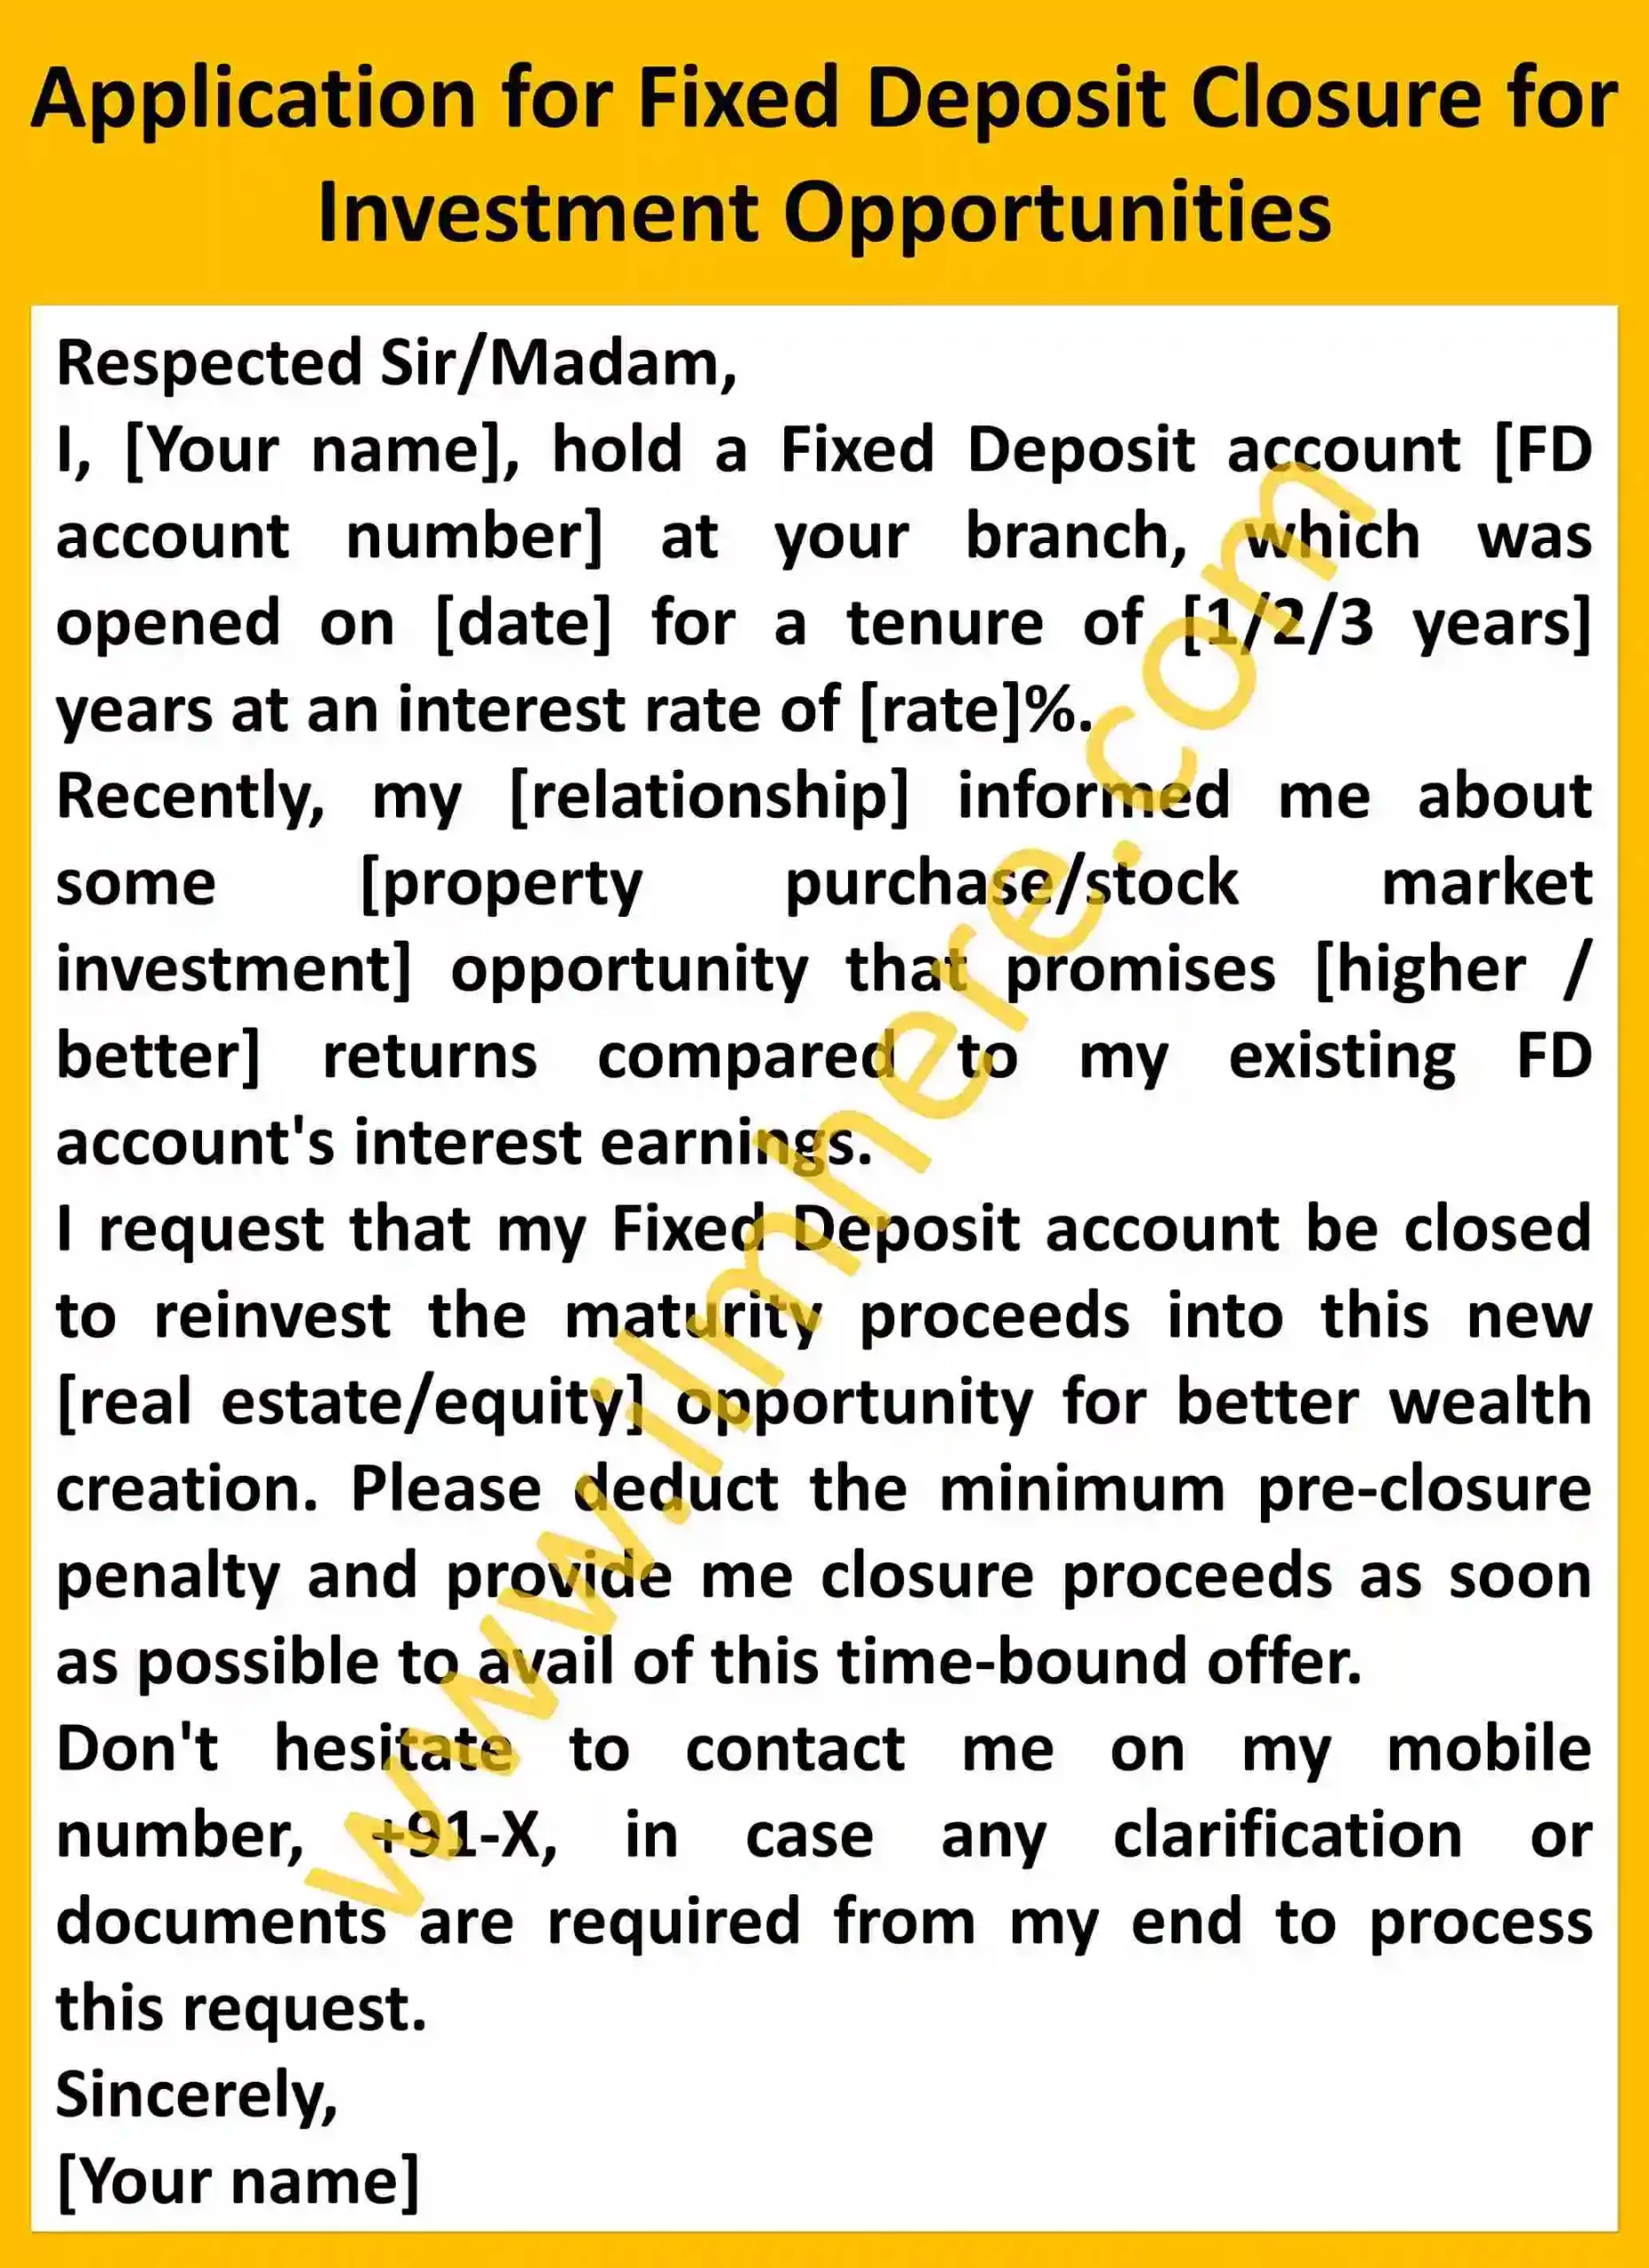 Application for Fixed Deposit Closure for Investment Opportunities